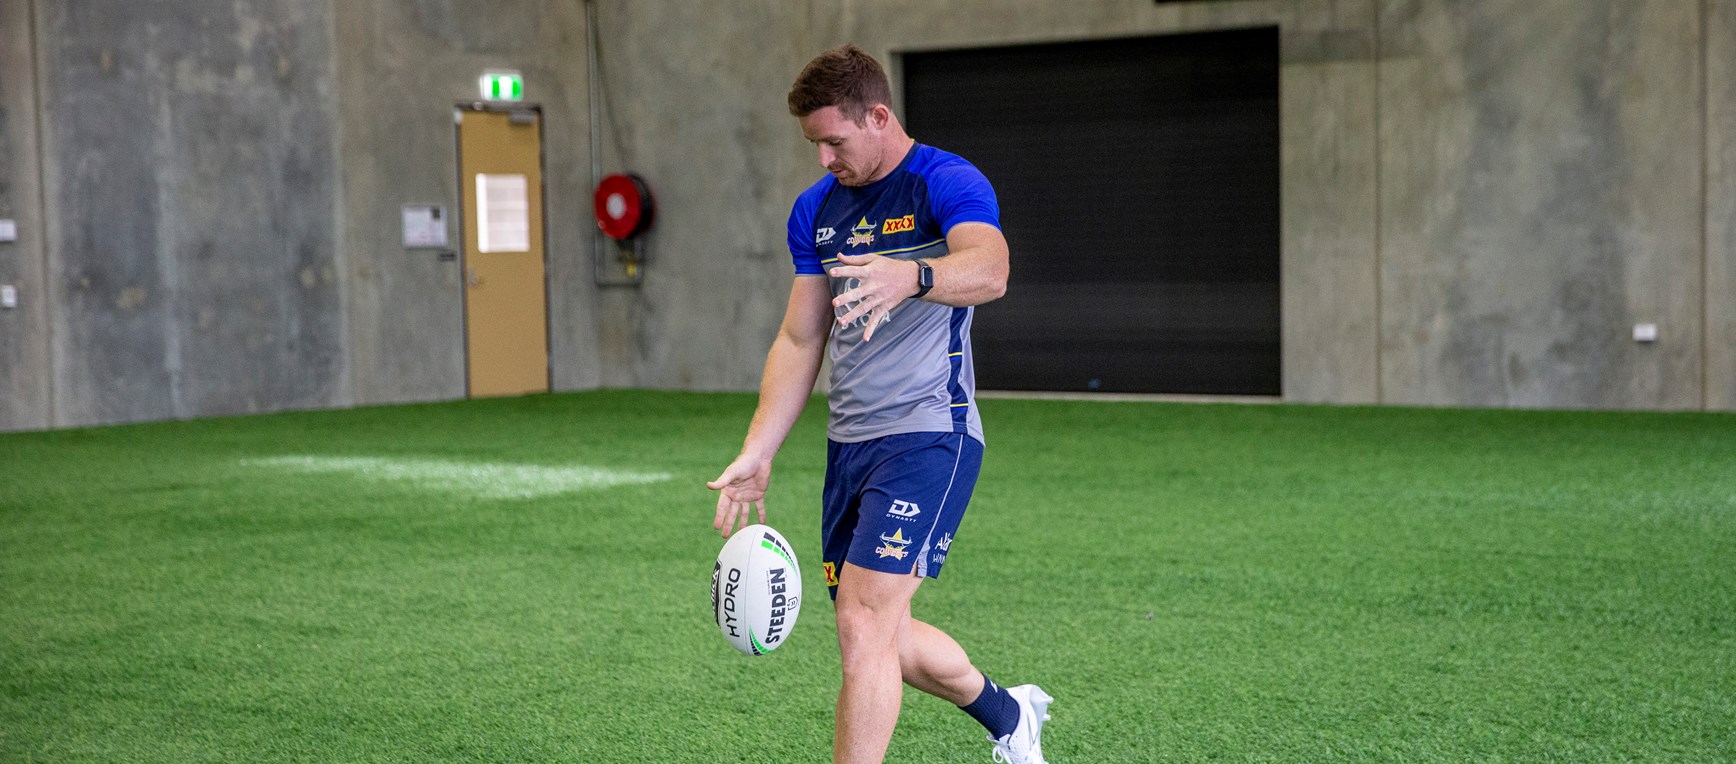 Best of the Cowboys kicking session with ex-AFL player